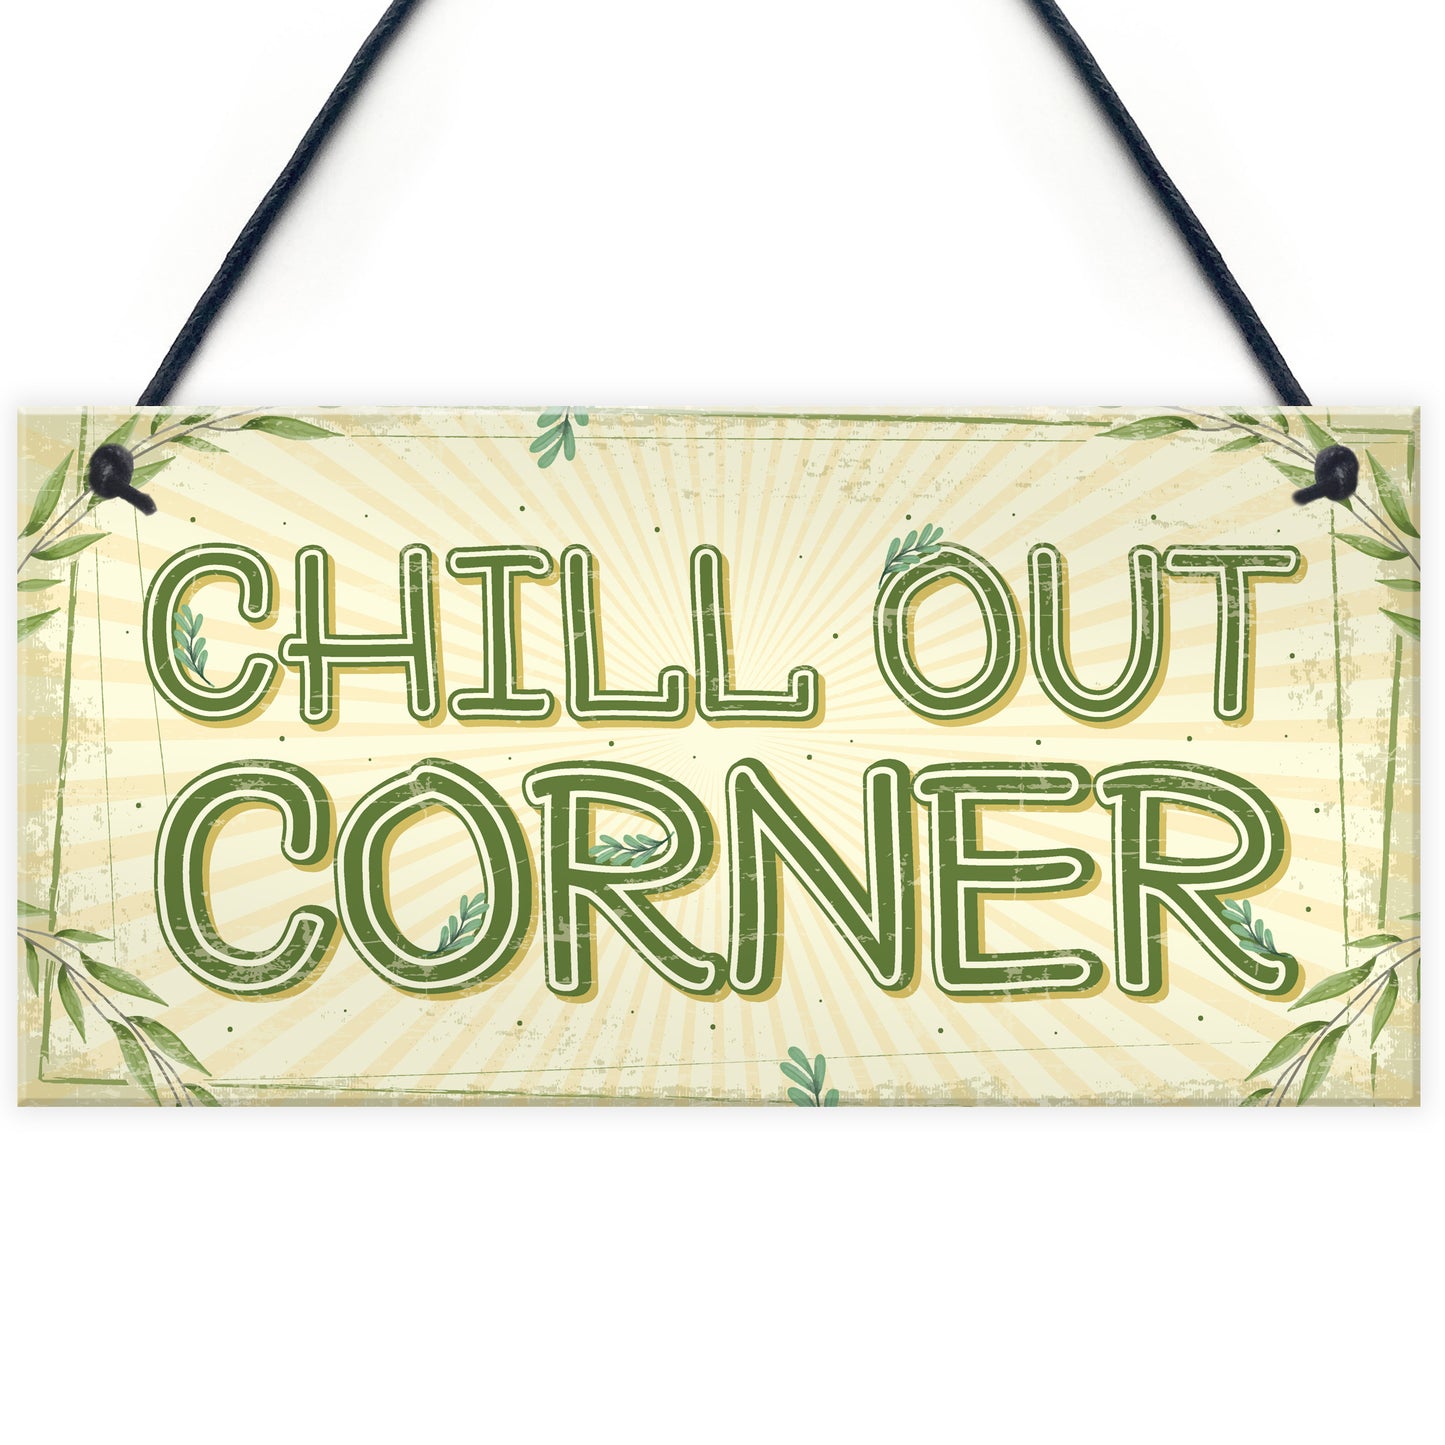 Chill Out Corner Man Cave Shed SummerHouse Sign Hot Tub Gift